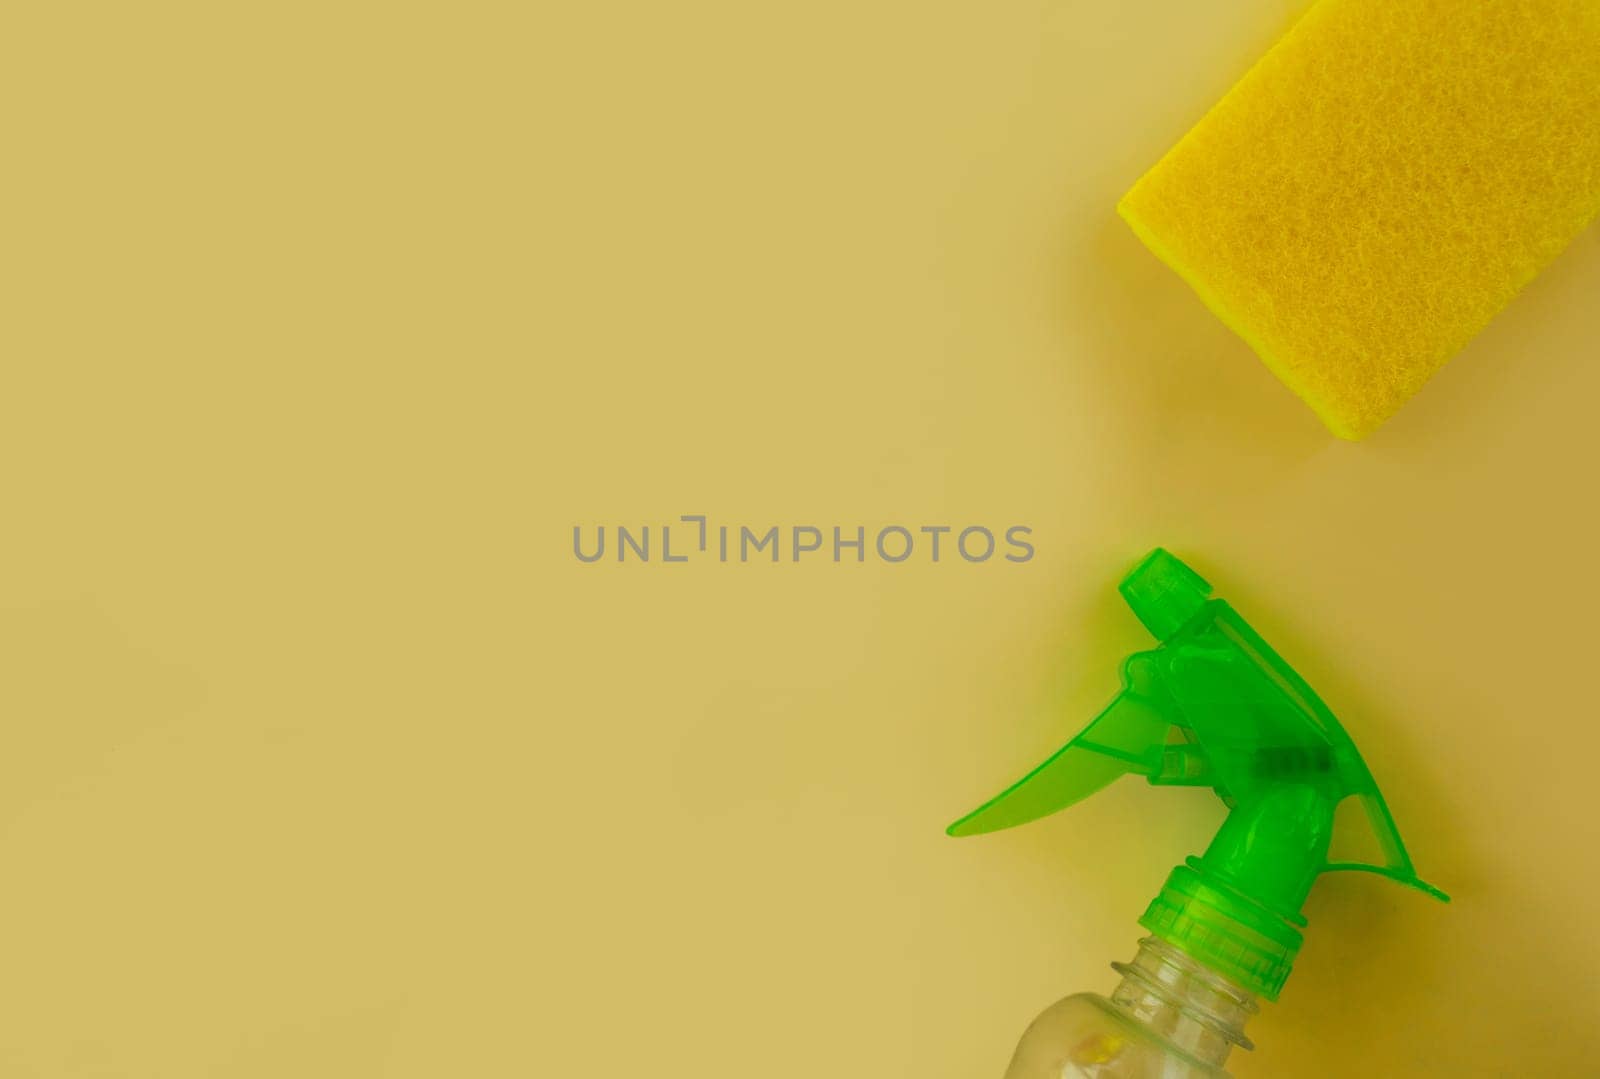 Cleaning. Flat lay Bottle with cleaning product, sponge against yellow background. Cleaning supplies, top view.